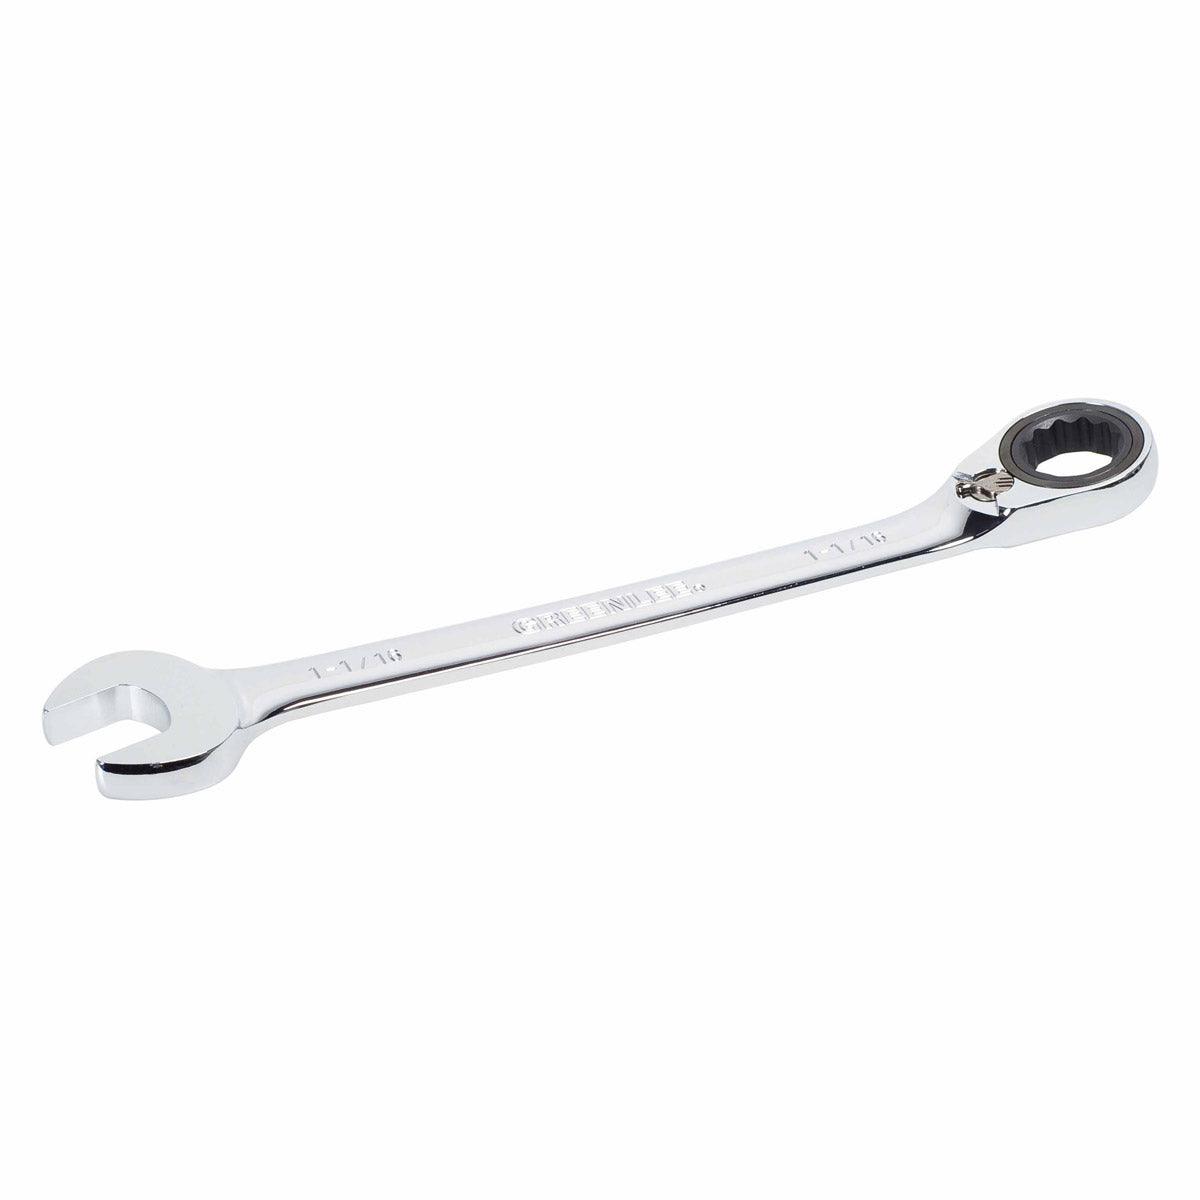 Greenlee 0354-24 1-1/16" Combination Ratcheting Wrench